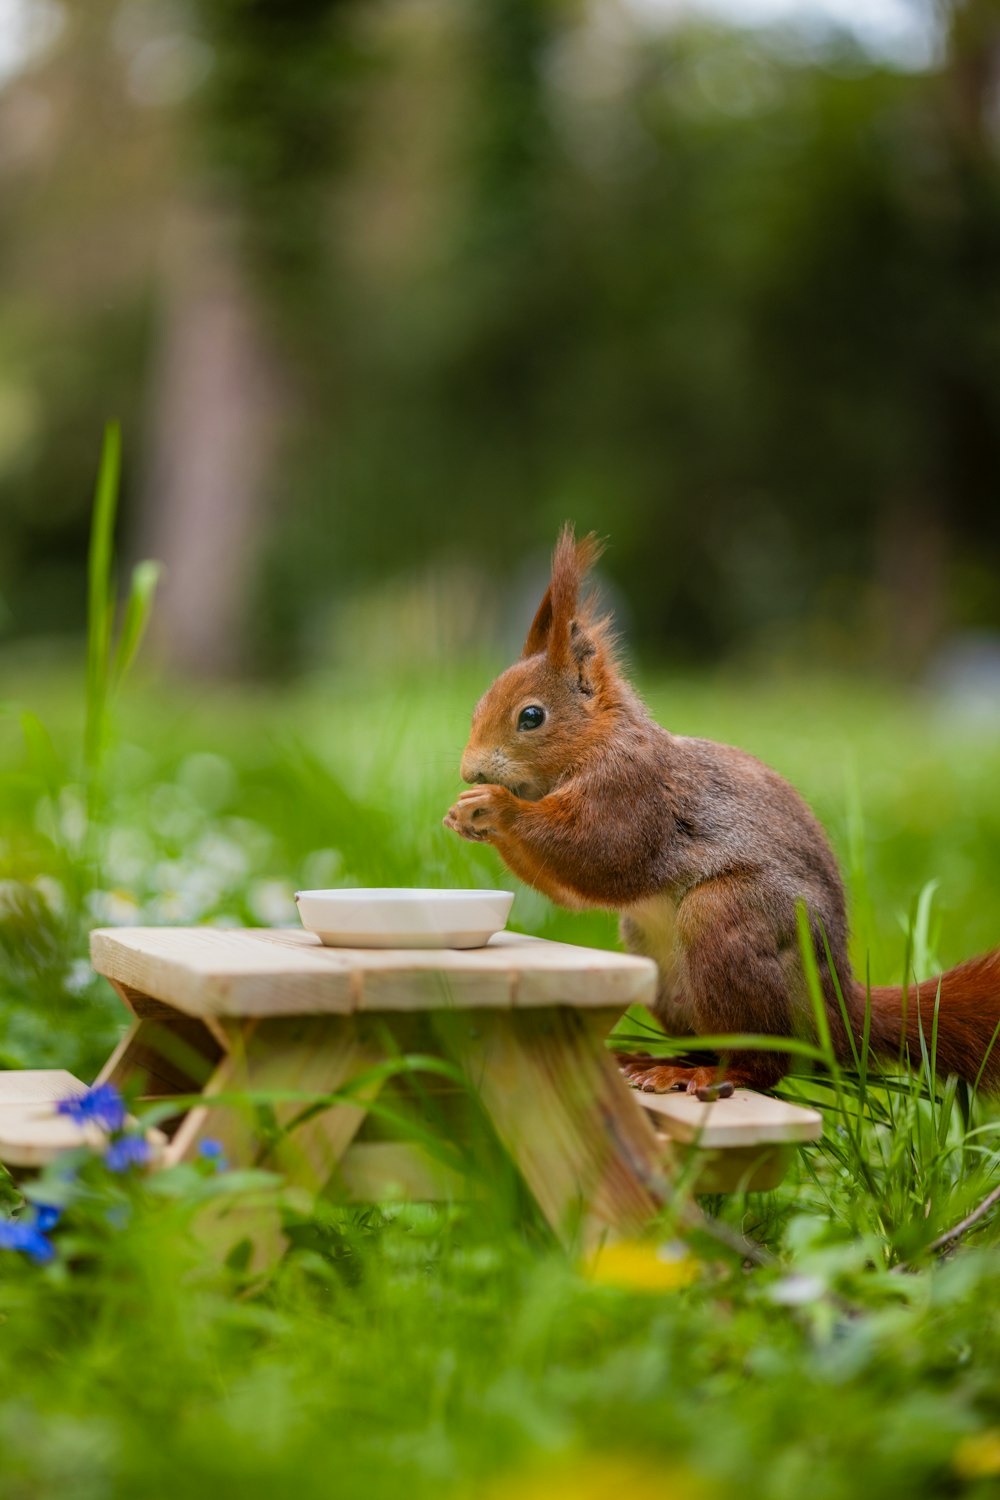 a squirrel is sitting on a table in the grass